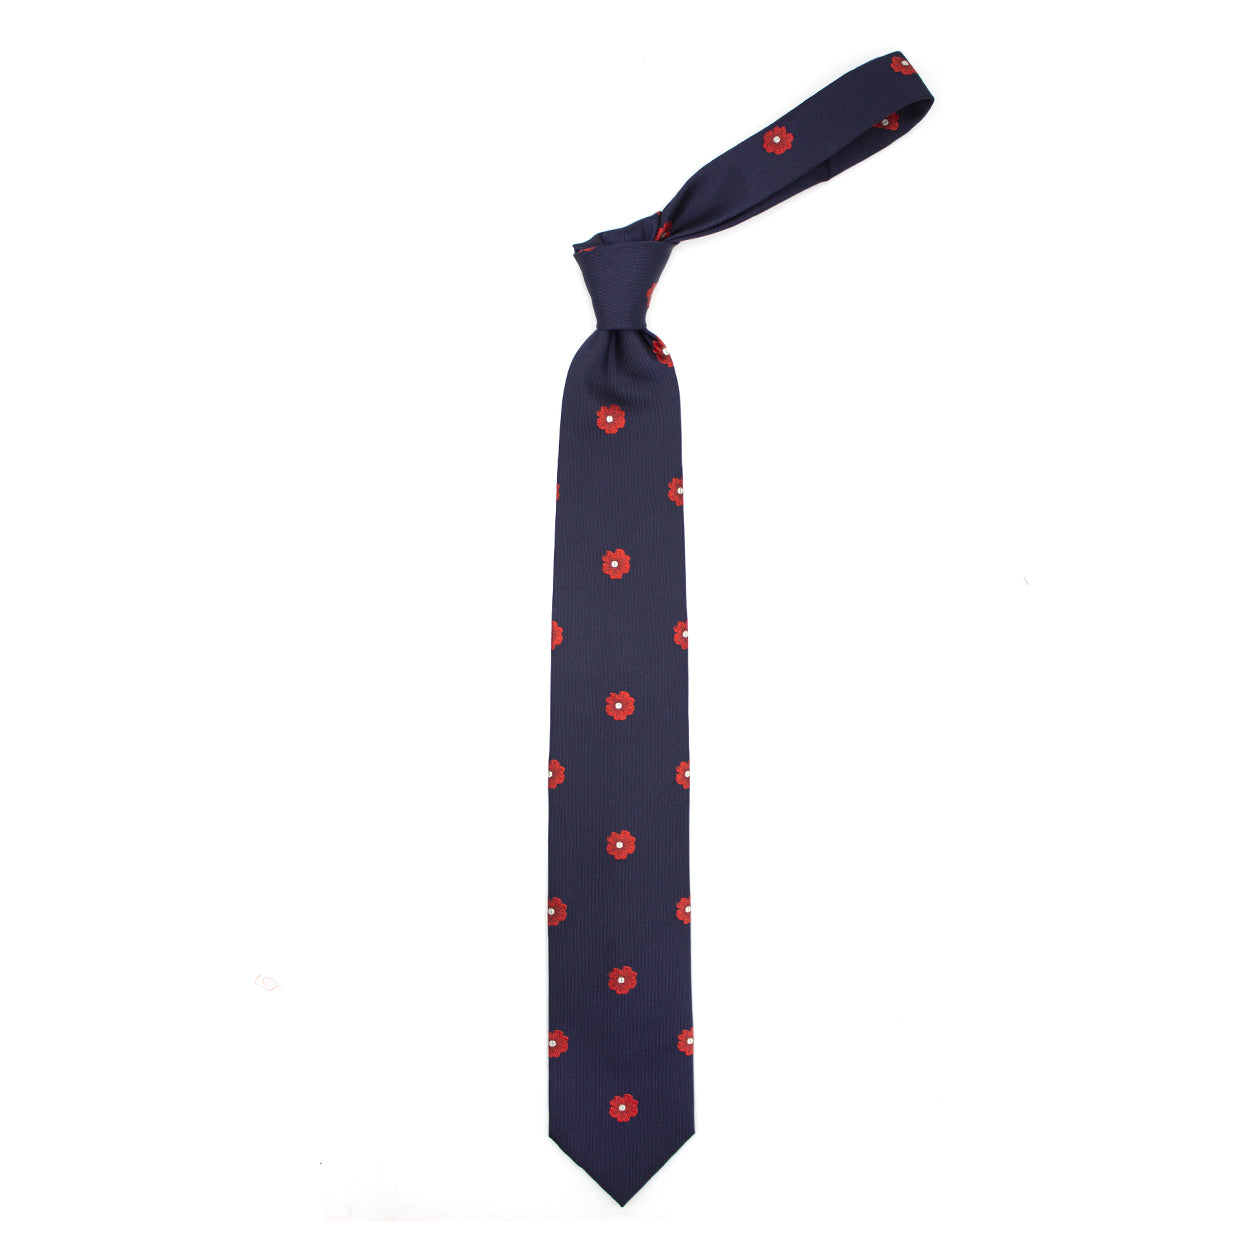 Blue tie with red and white flowers